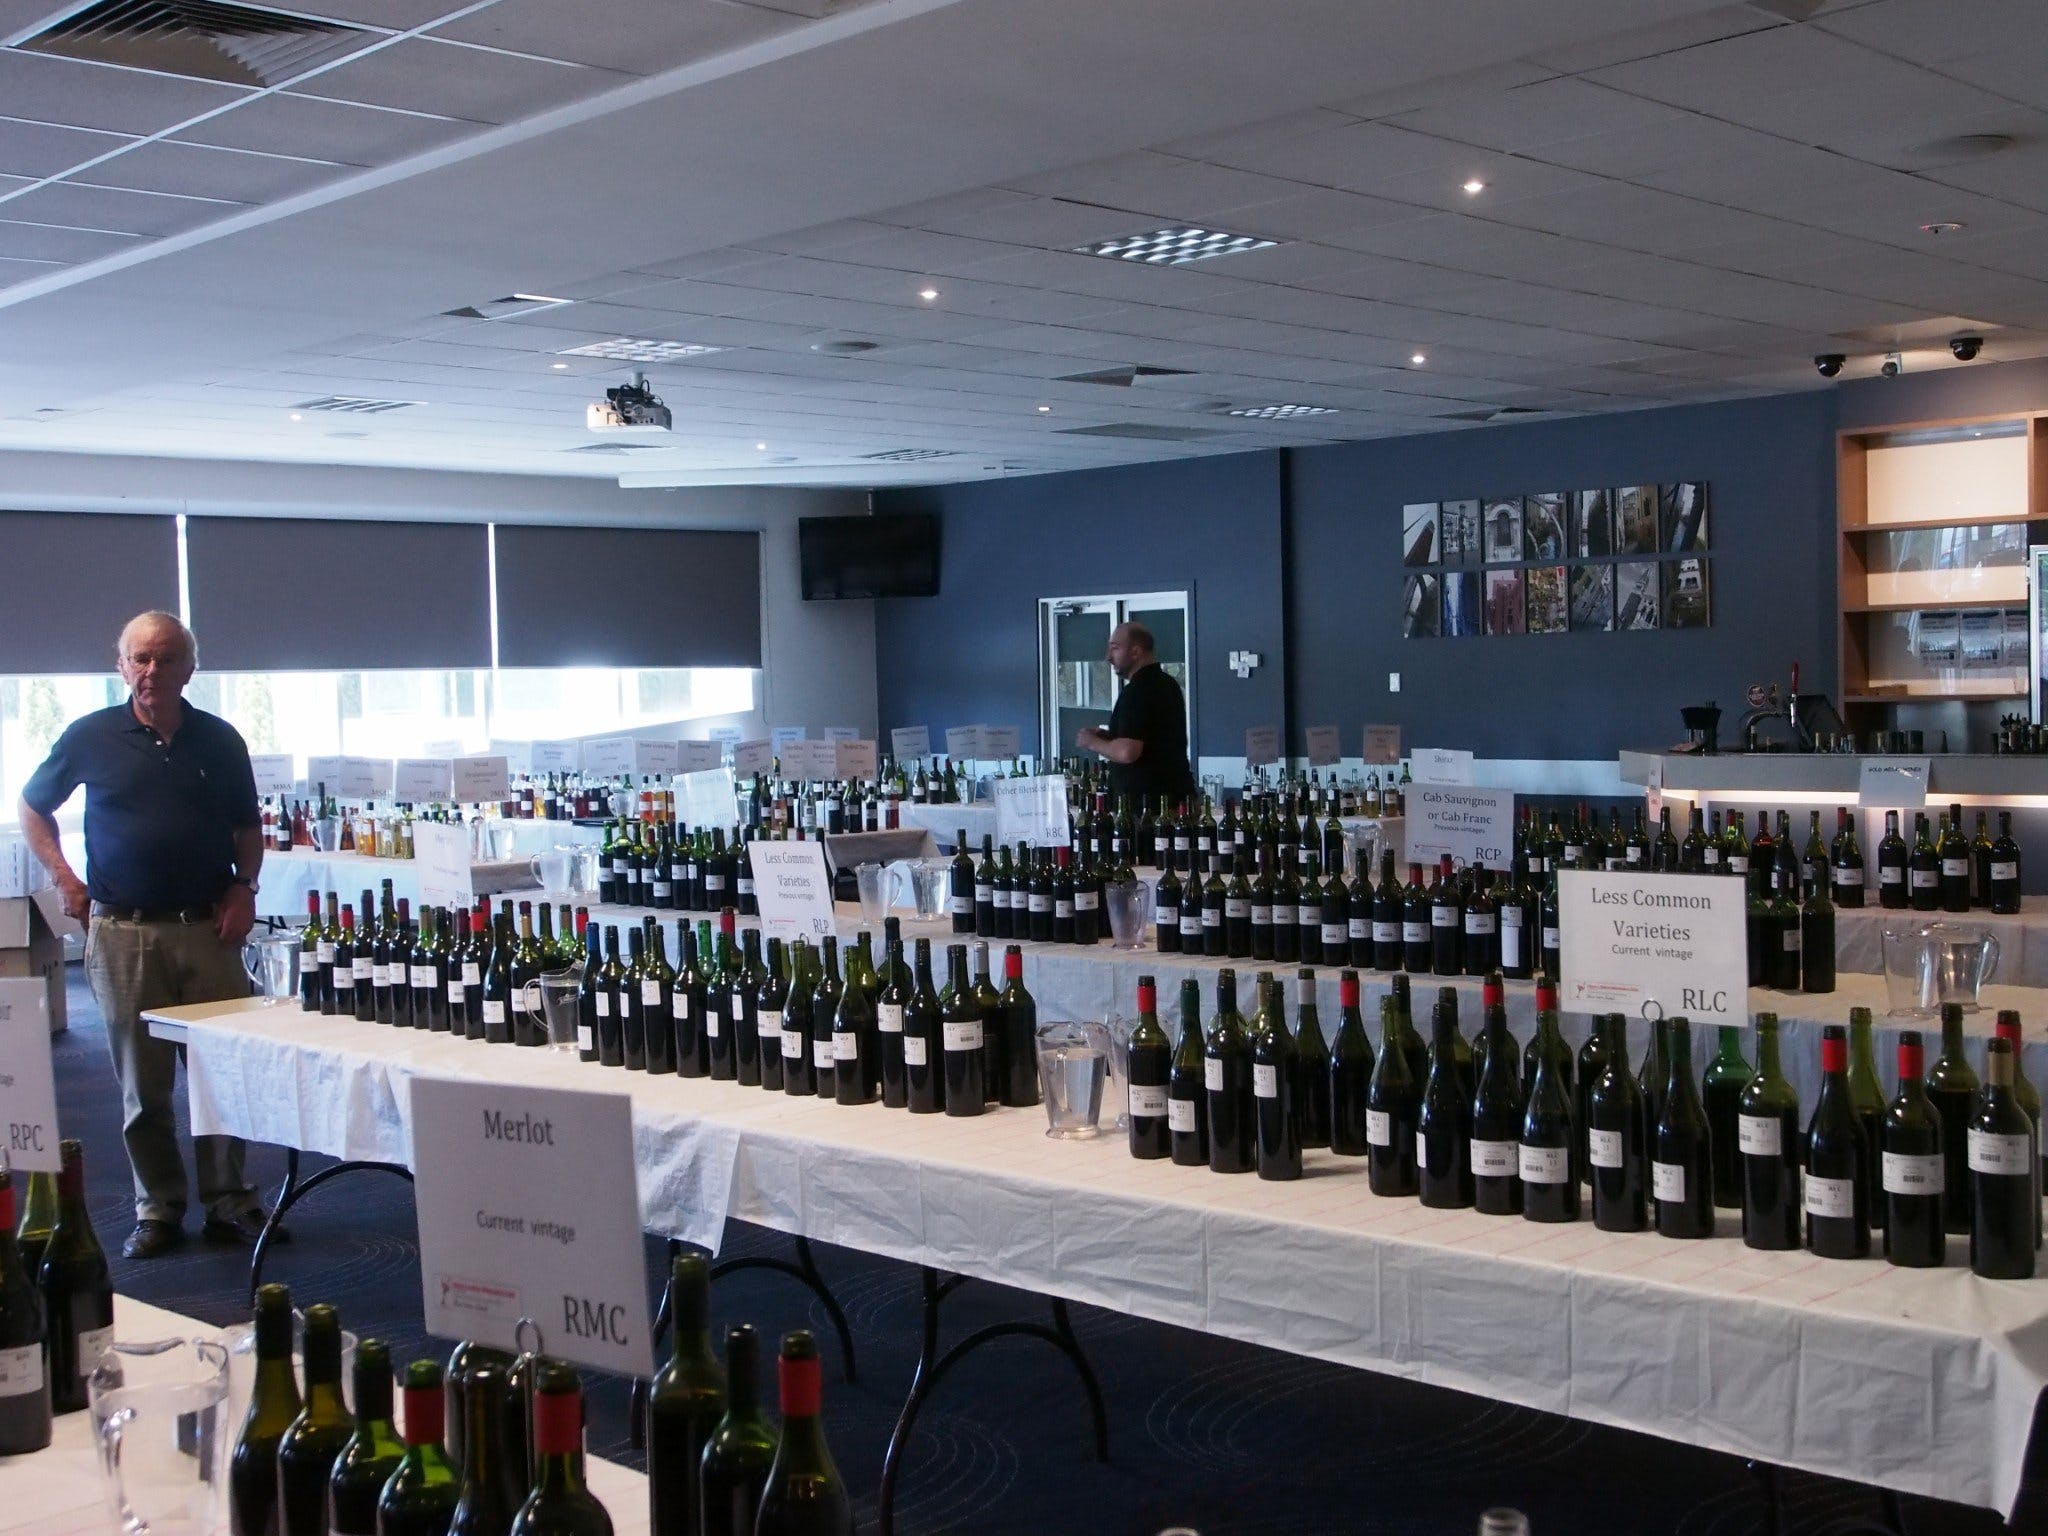 Eltham and District Wine Guild Annual Wine Show - 51st Annual Show - Accommodation Kalgoorlie